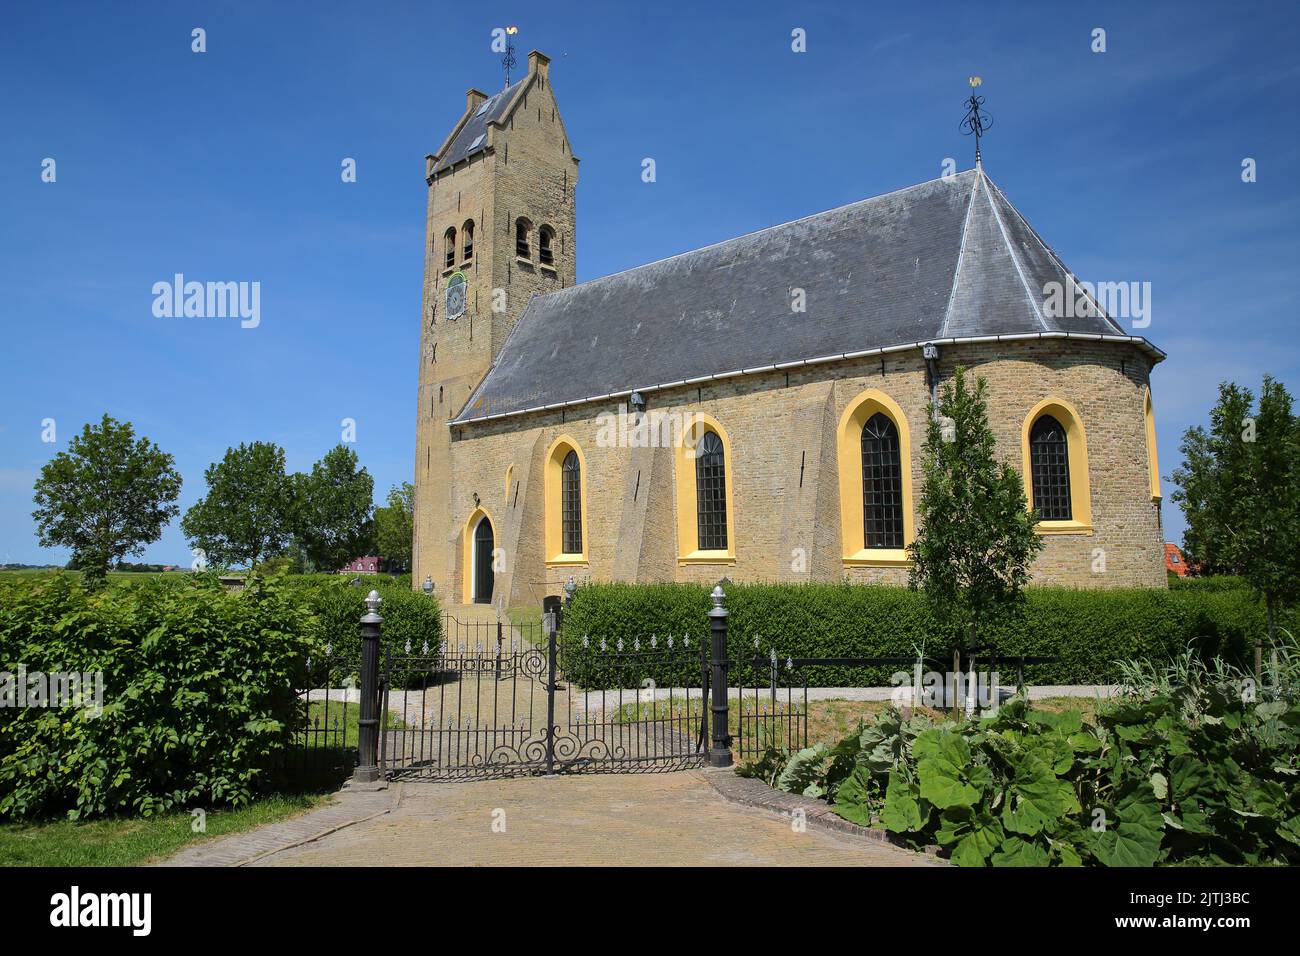 The church of Hichtum, Friesland, Netherlands, with its massive bell tower. Hichtum is a little rural village close to Bolsward Stock Photo